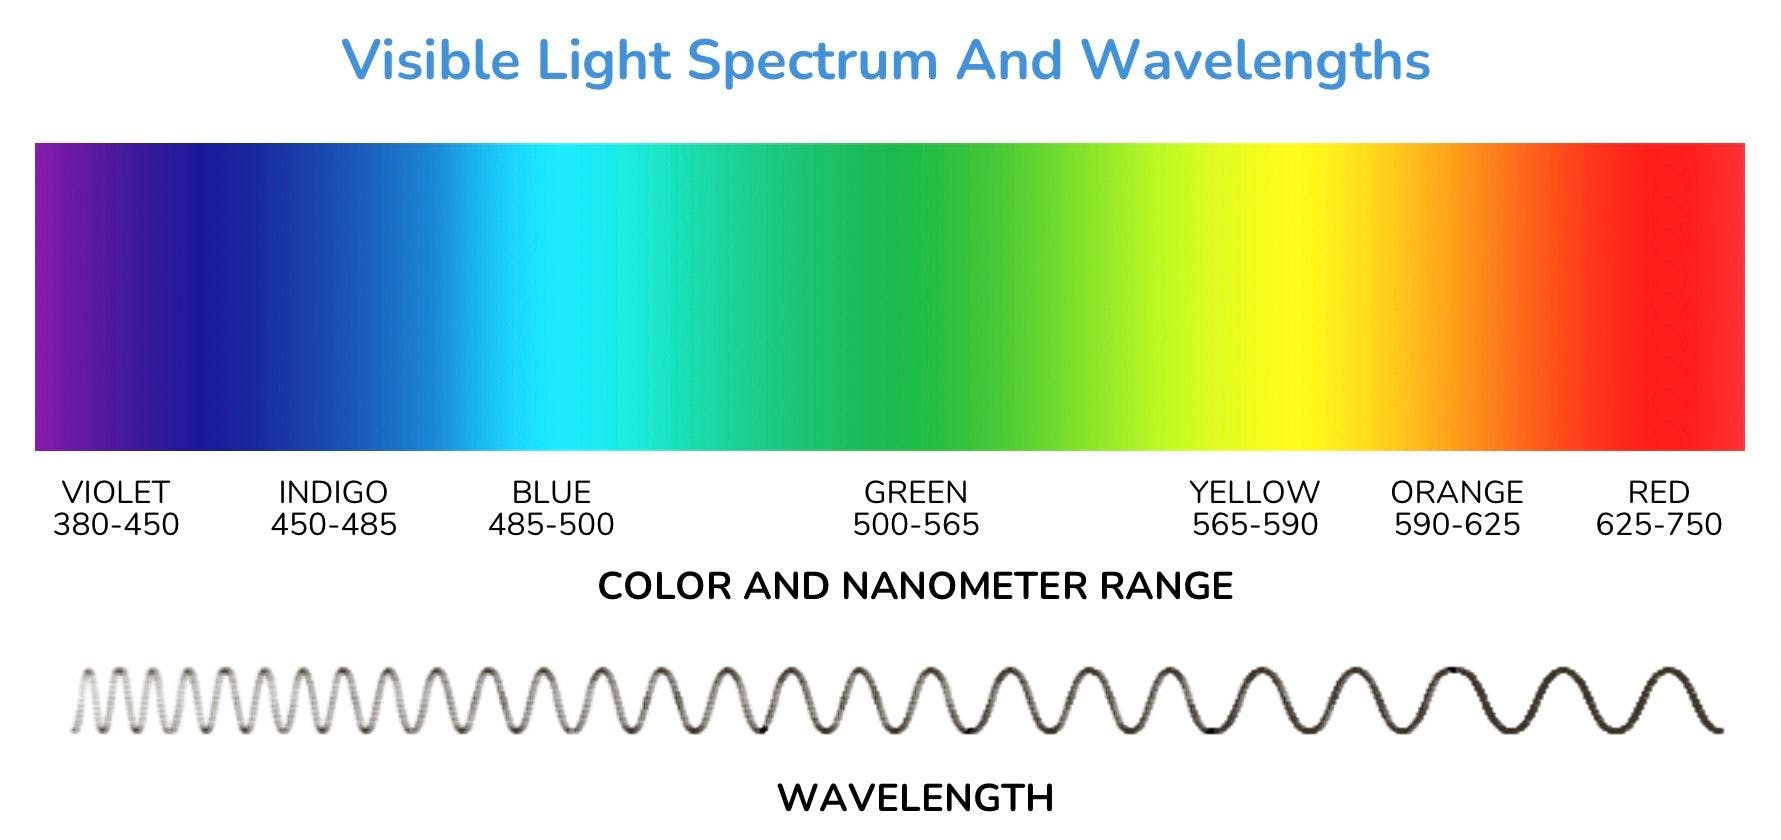 Visible light spectrum and wavelengths